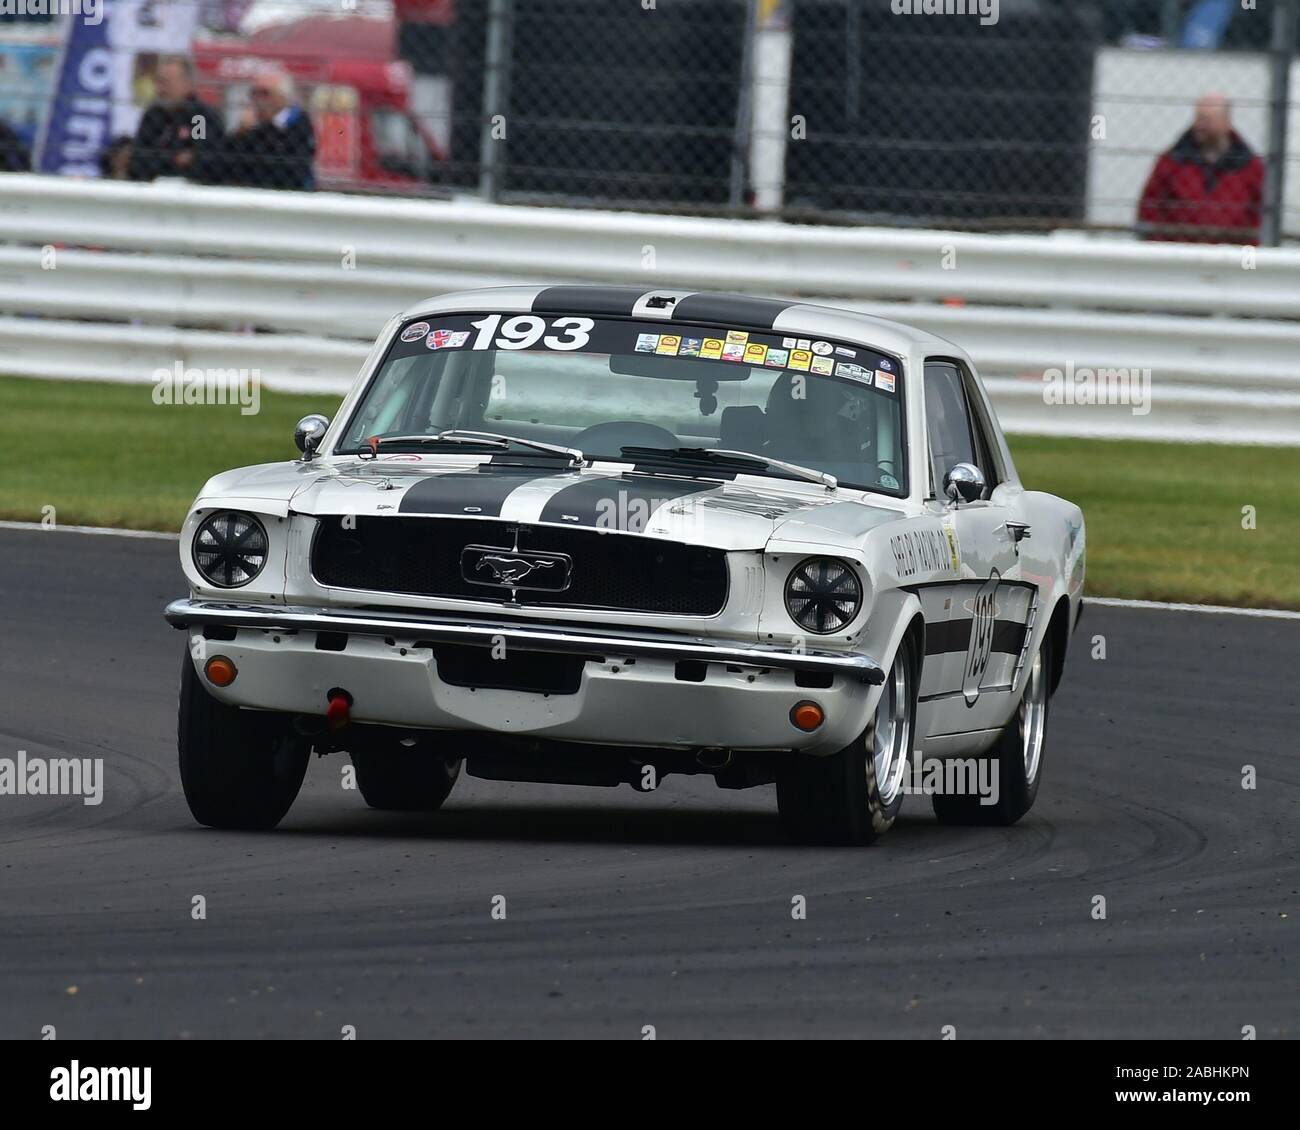 Victor Israelsson, Ford Mustang, Transatlantic Trophy for Pre '66 Touring Cars, Silverstone Classic, July 2019, Silverstone, Northamptonshire, England Stock Photo